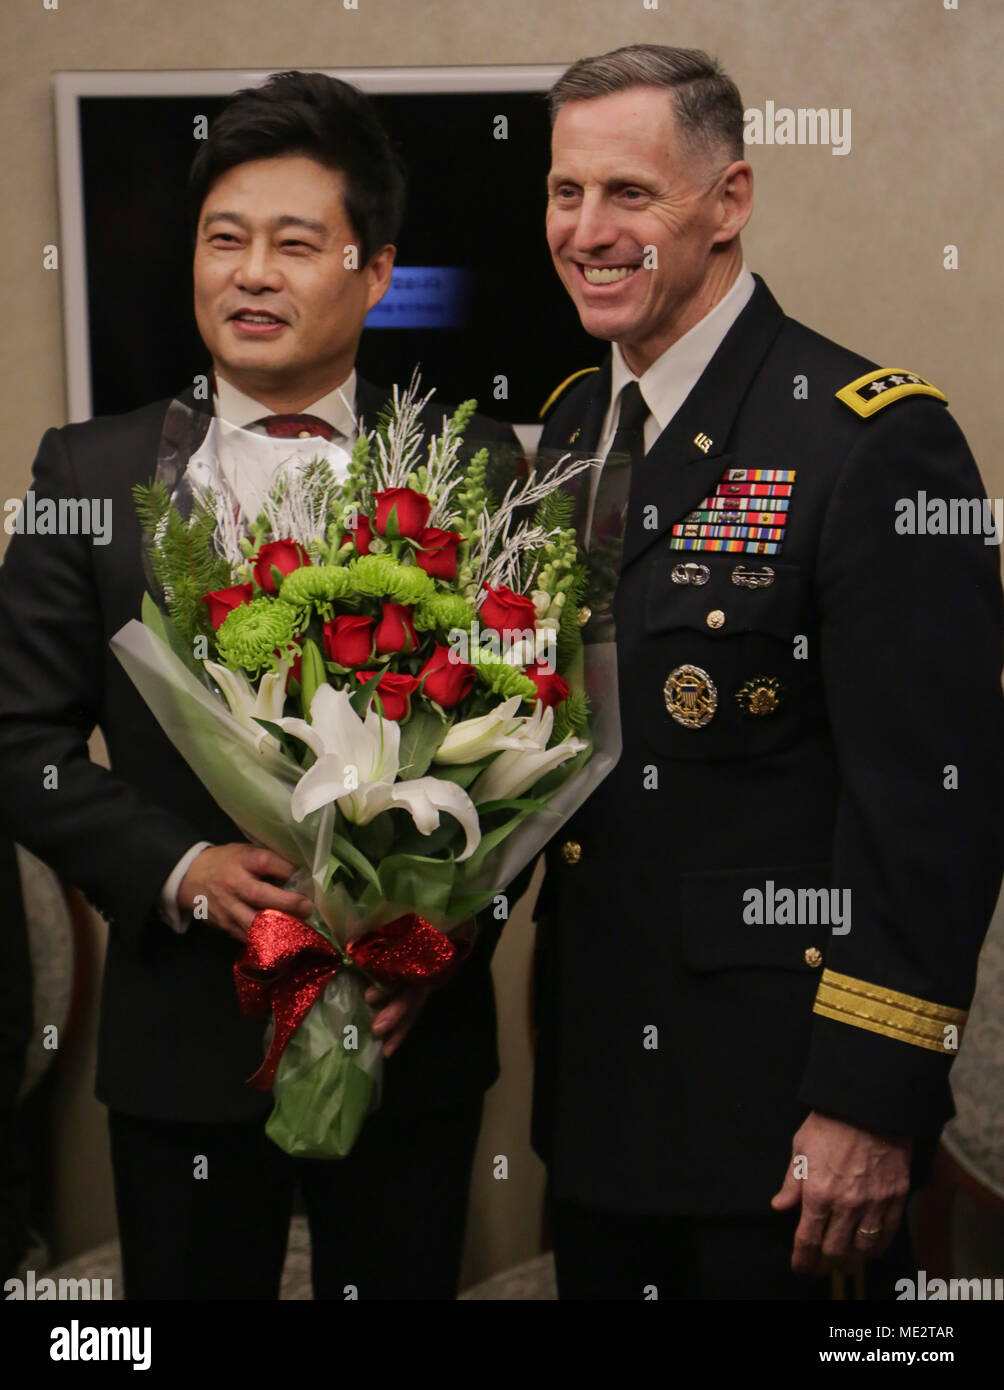 U.S Army Lt. Gen. Thomas S. Vandal commander of the Eighth army, presents flowers to Seo, Jung-Hak after the Holiday concert in Seoul, Korea Dec. 17, 2017. The concert was hosted by the Eighth Army command in conjunction with local community leaders during the holiday season to promote harmonious relations between the U.S. Army and the Republic of Korea (ROK). Over 1500 U.S. Soldiers and ROK soldiers attended performances by the Eighth Army Band and the Prime Philharmonic Orchestra . (U.S. Army photo by Pfc. Edward Randolph) Stock Photo